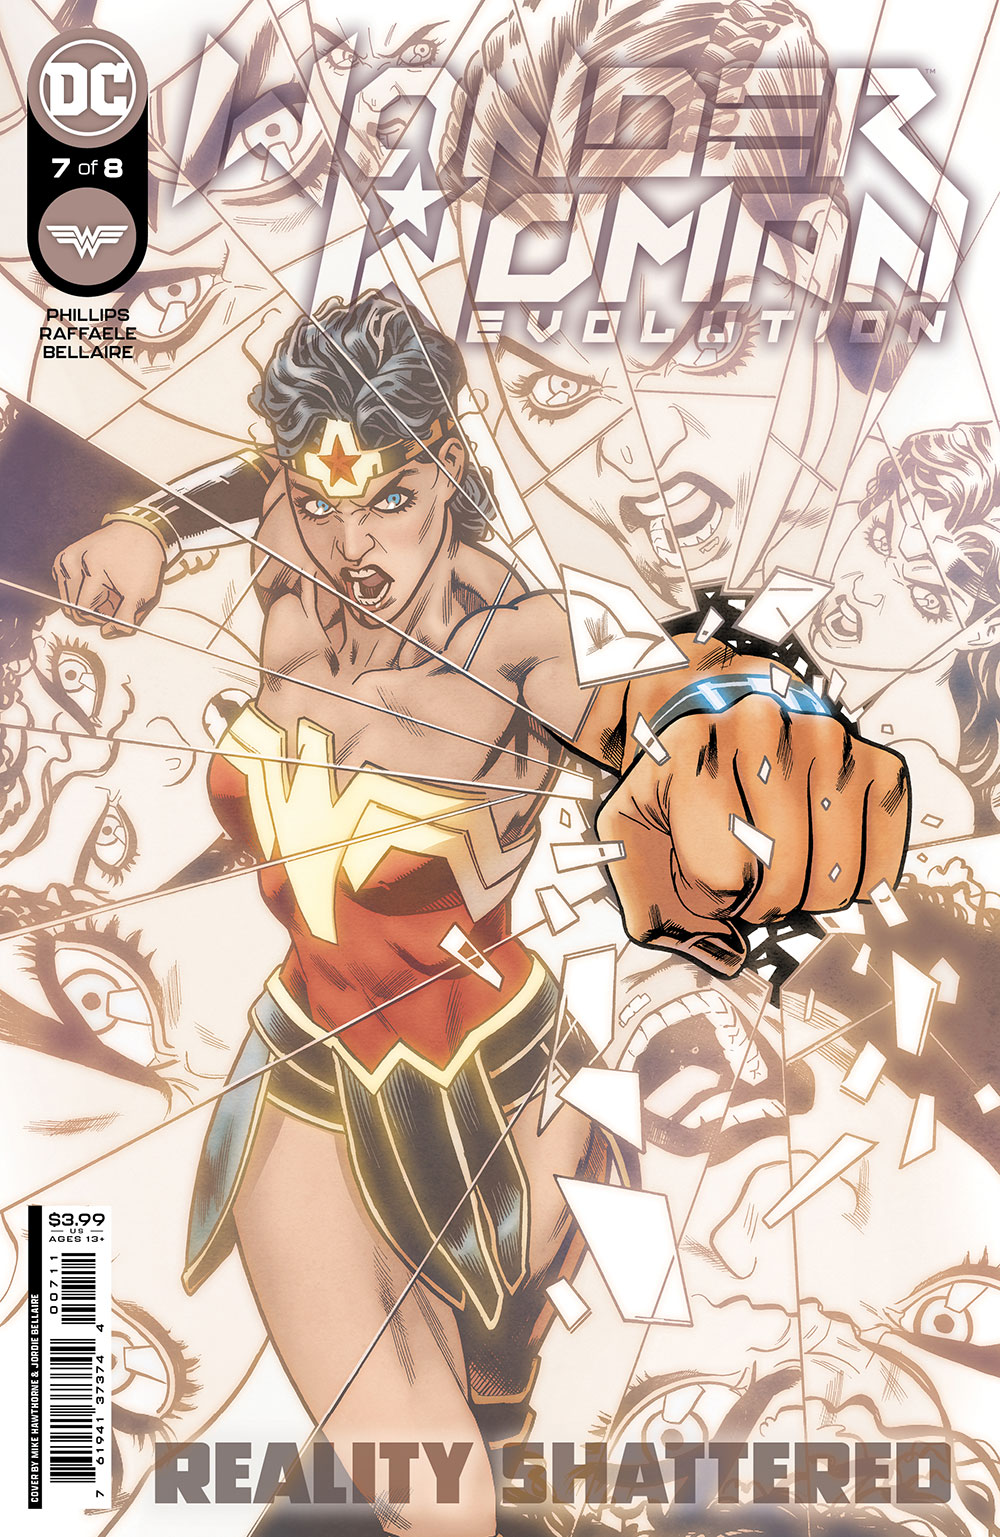 Wonder Woman Evolution #7 Cover A Mike Hawthorne (Of 8)